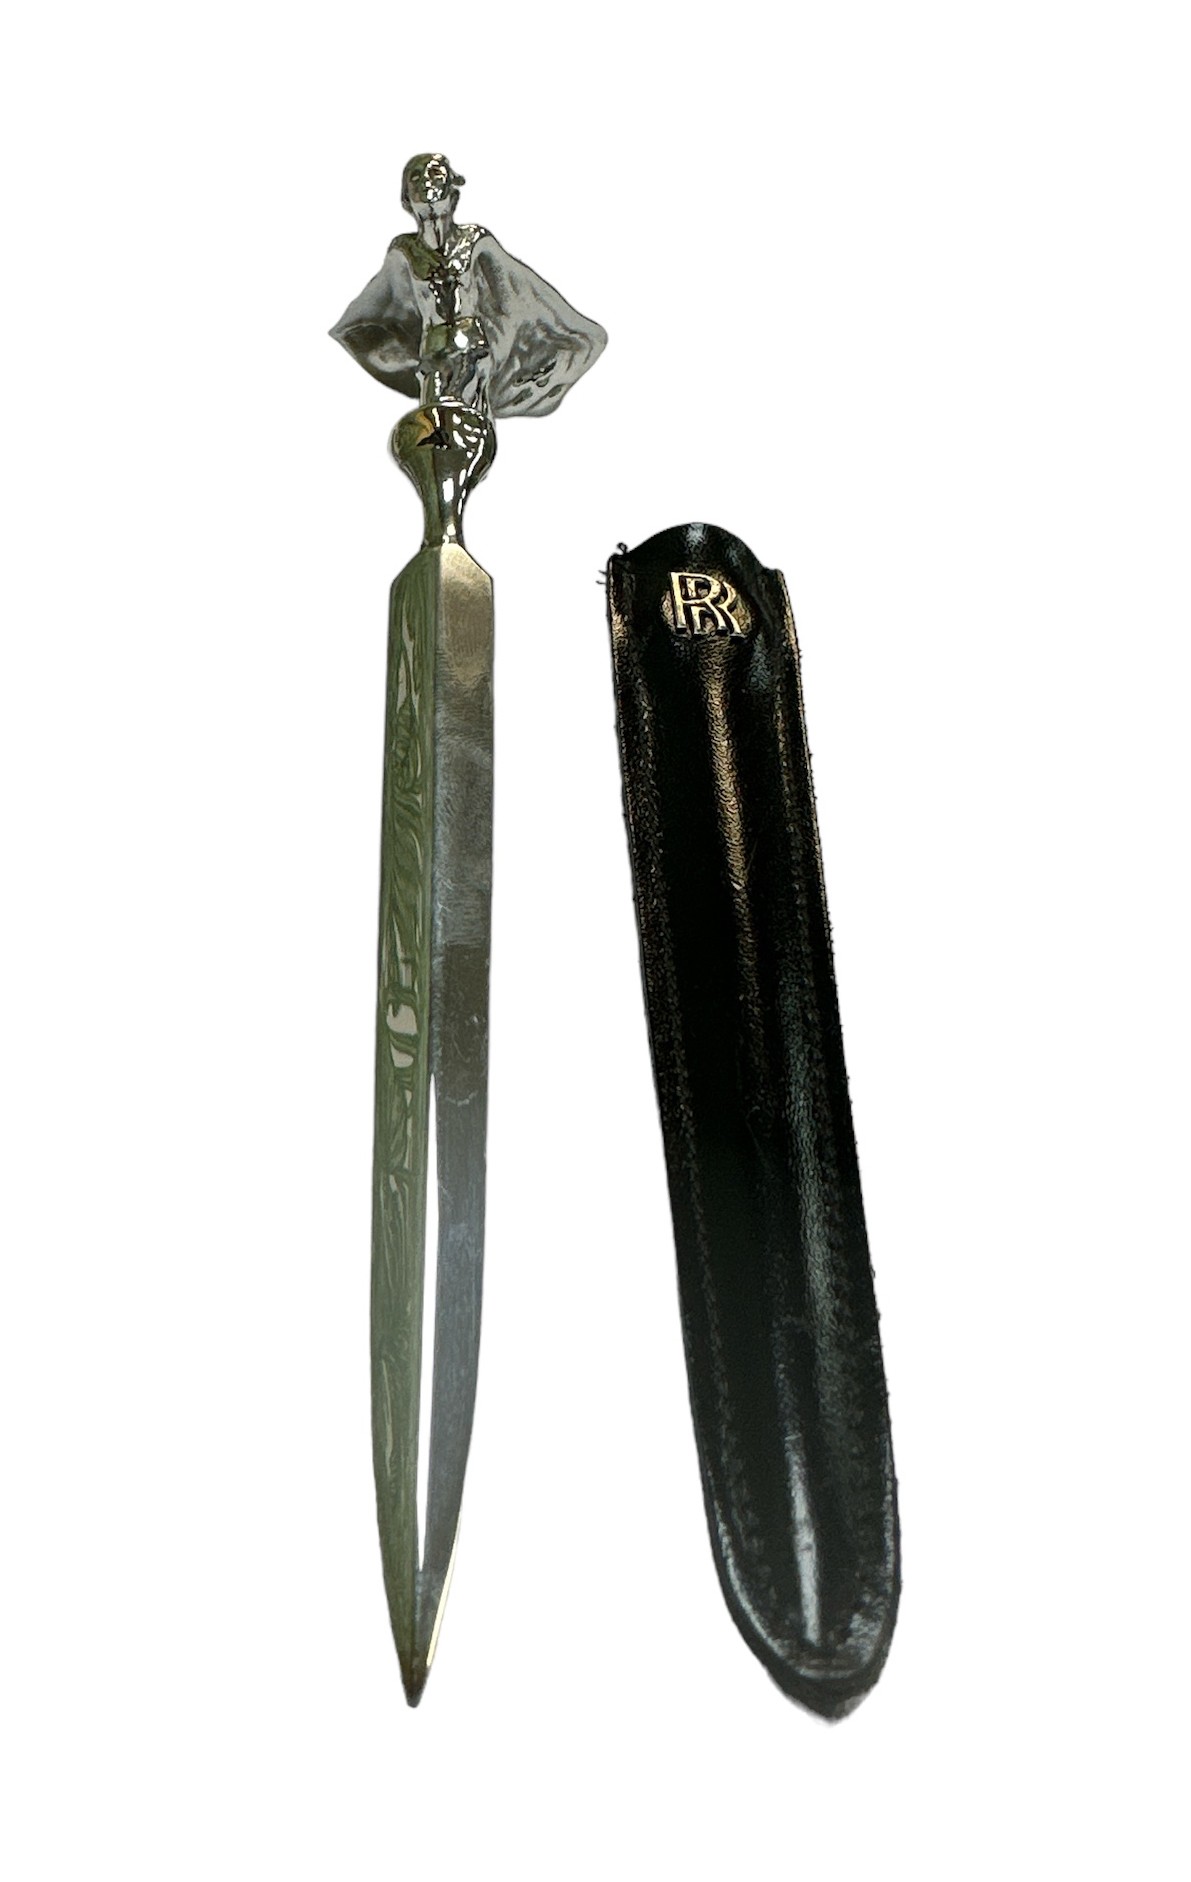 Rolls Royce limited edition Spirit of Ecstasy showroom desk letter opener, as issued by Rolls